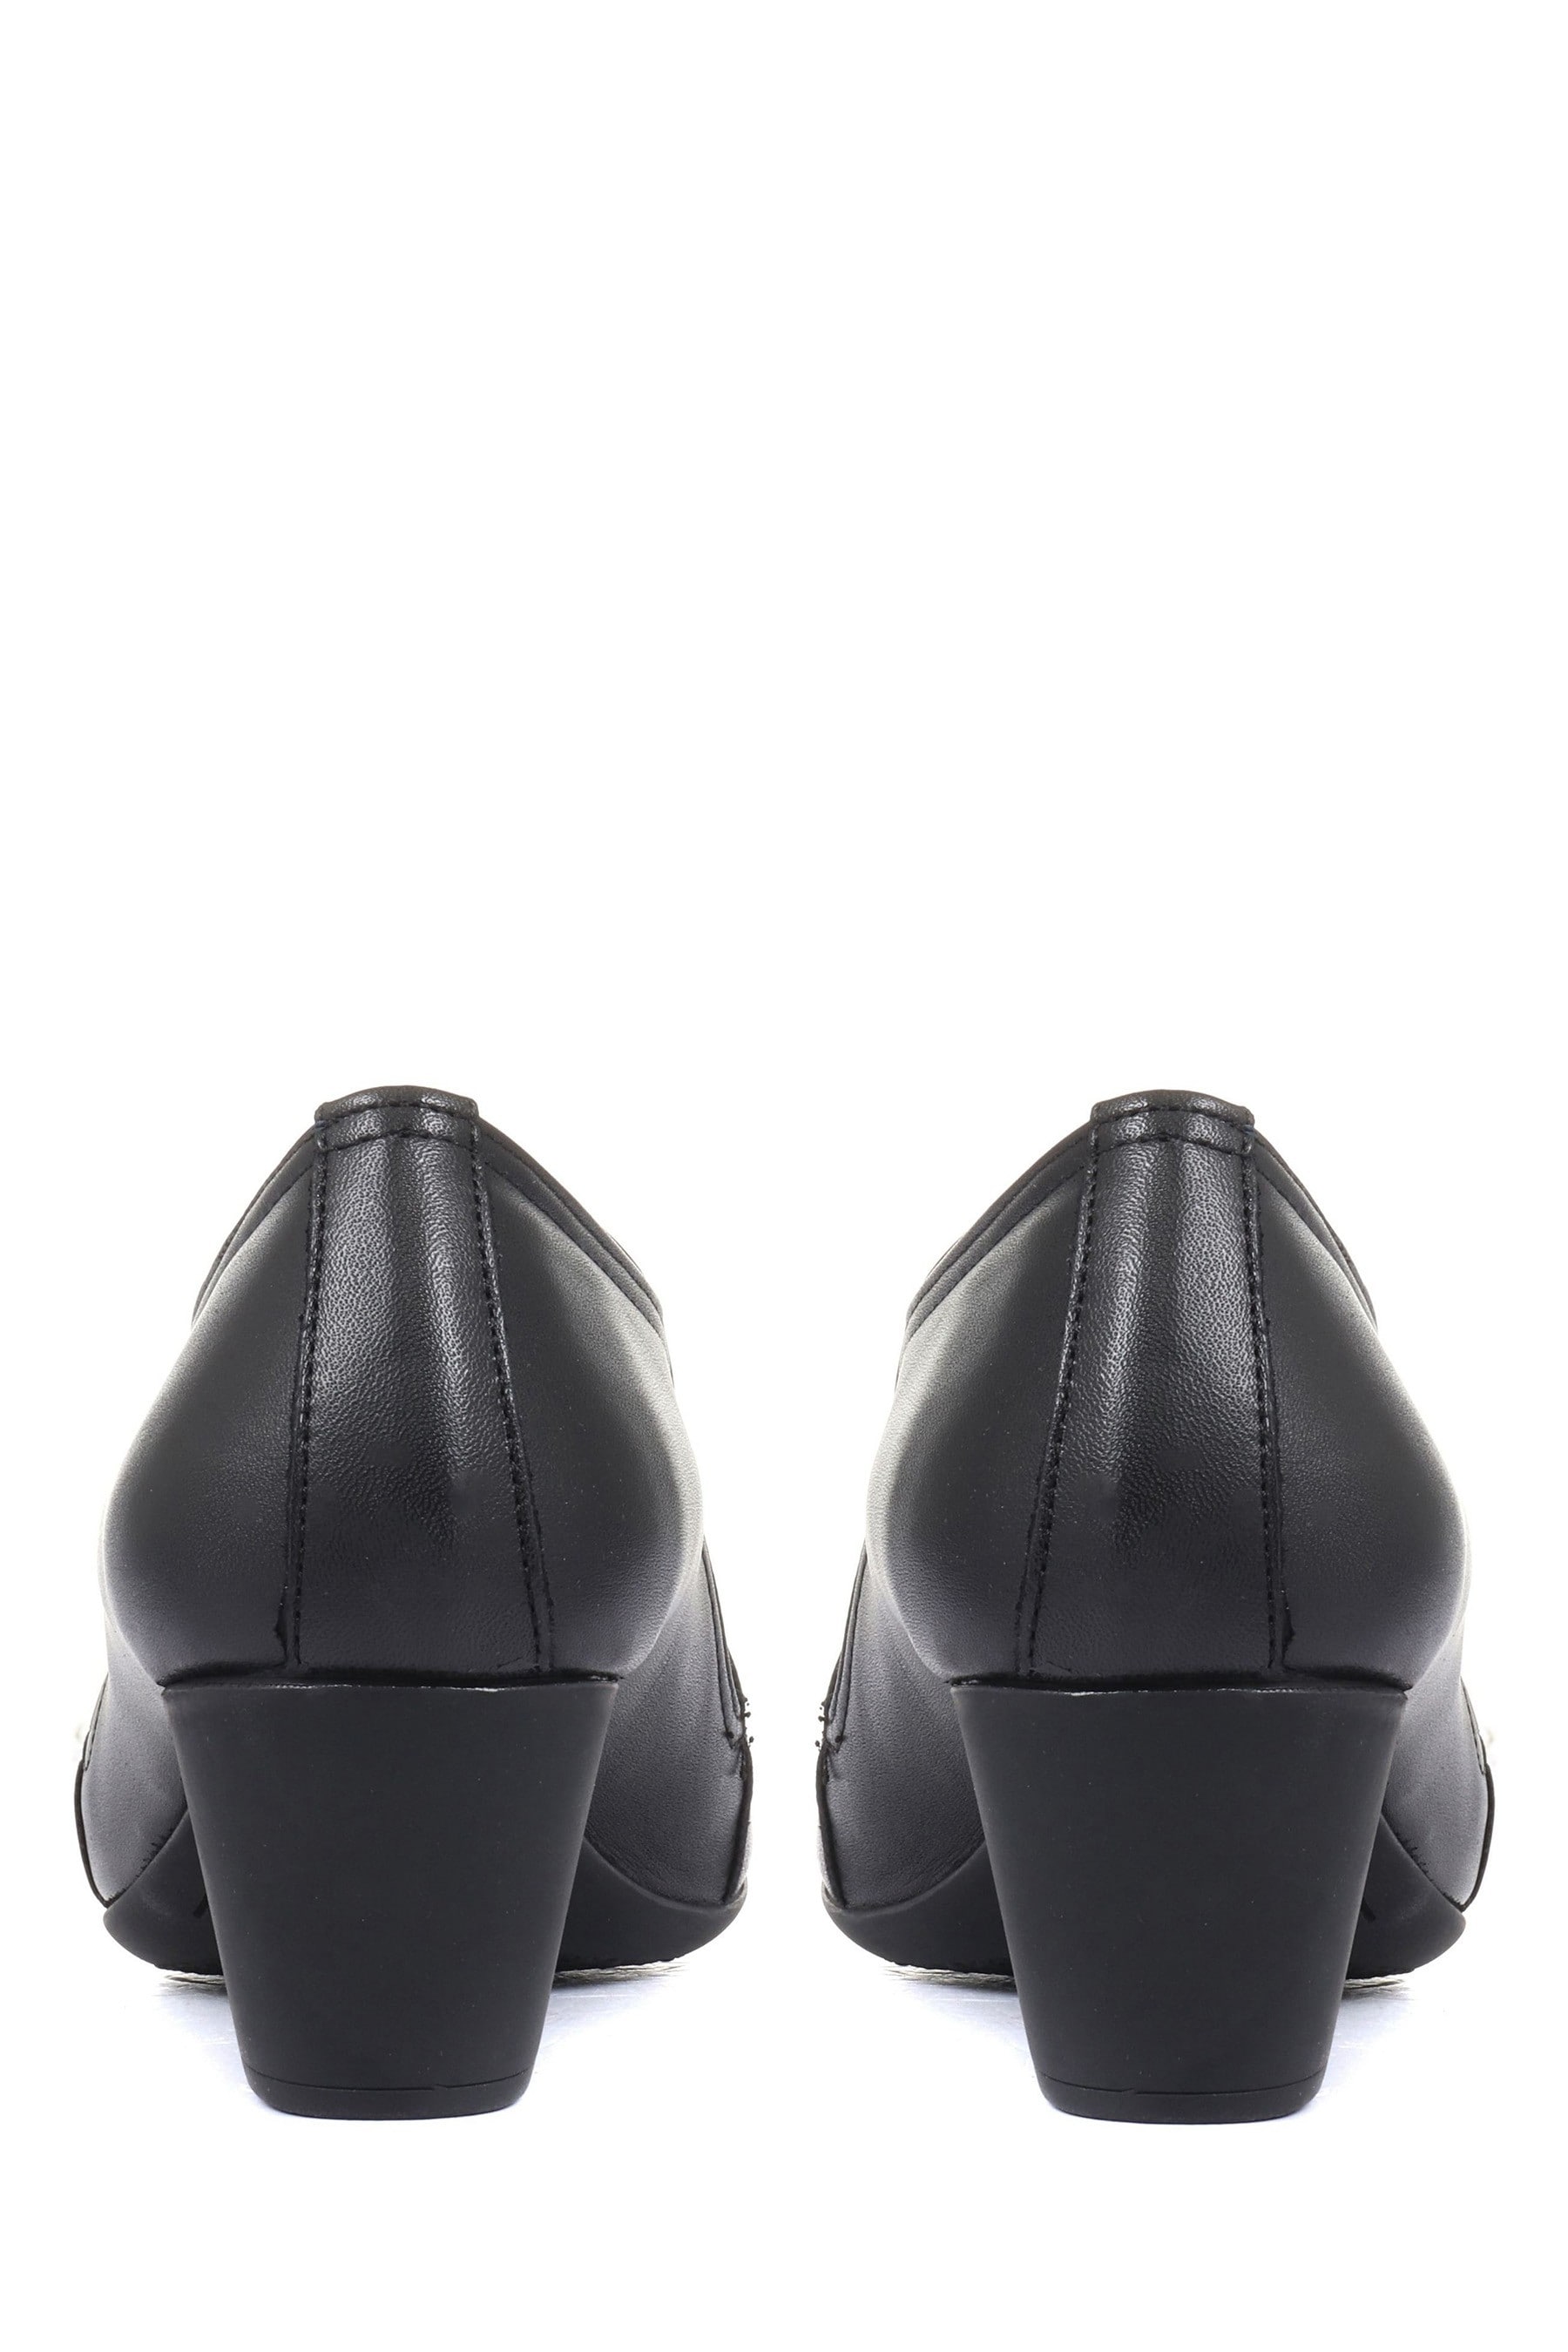 17 Most Comfortable Dress Shoes for Women in 2024